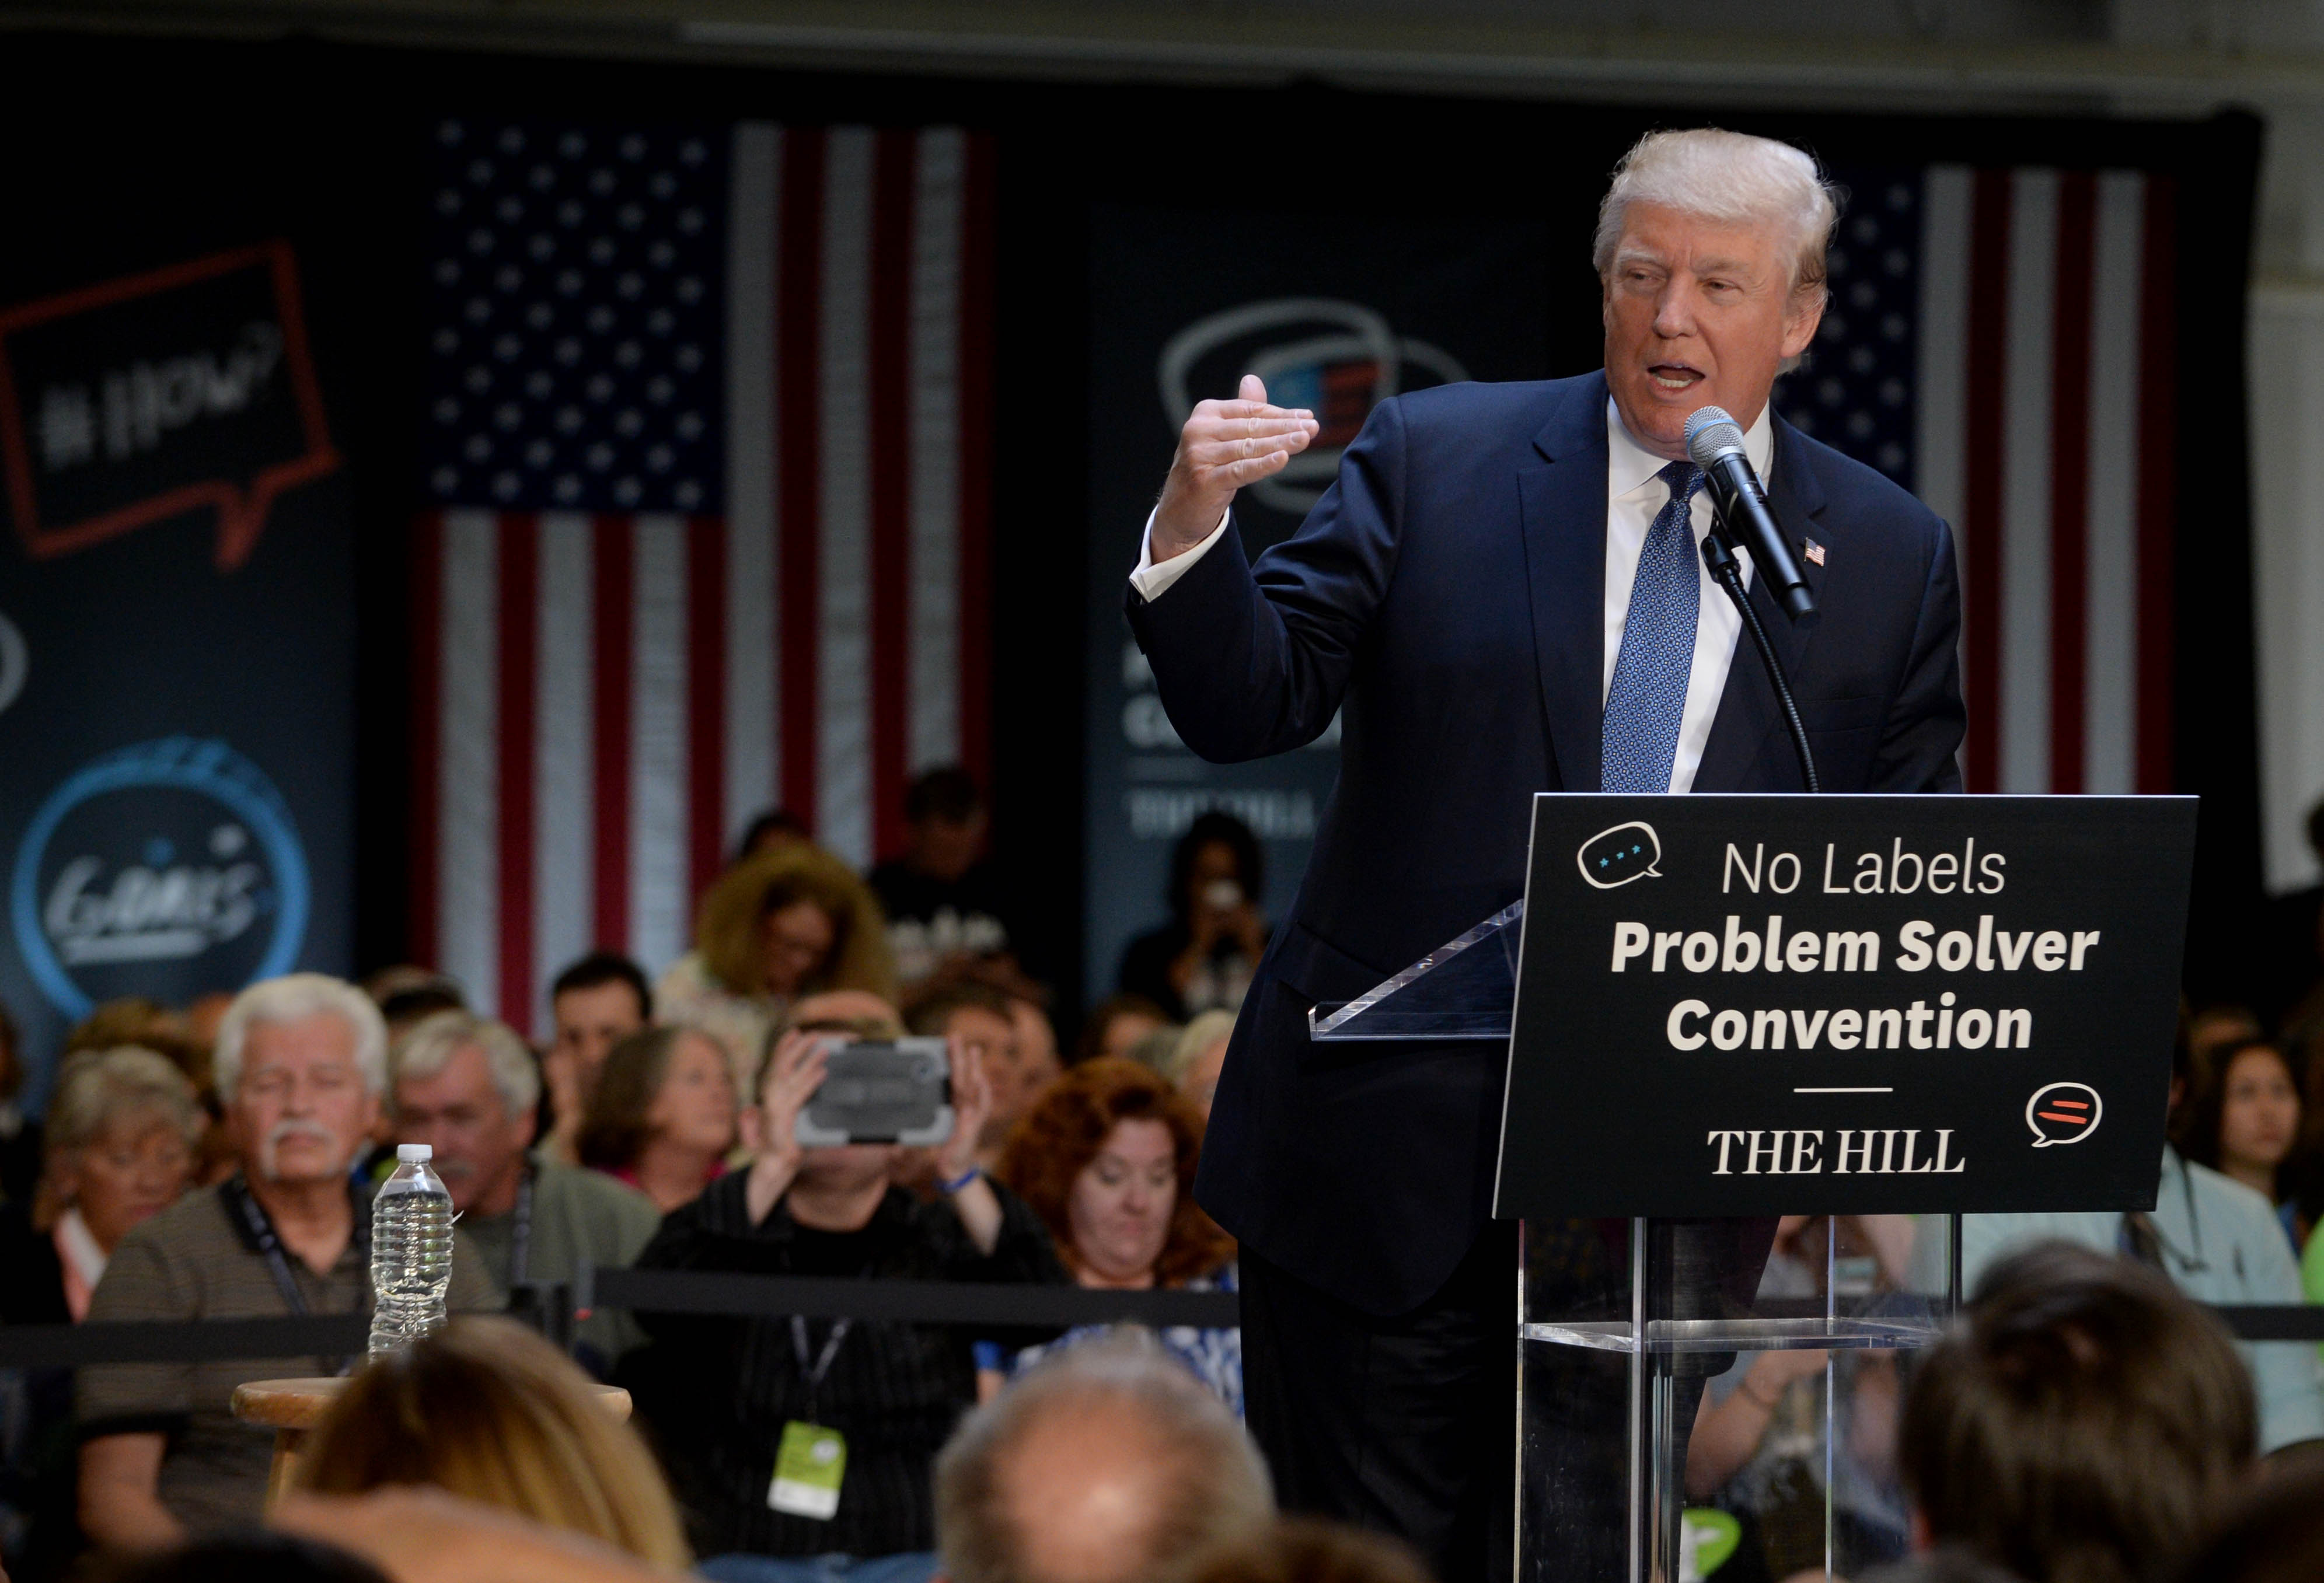 Donald Trump speaks at the No Labels Problem Solver convention October 12, 2015 in Manchester, New Hampshire.